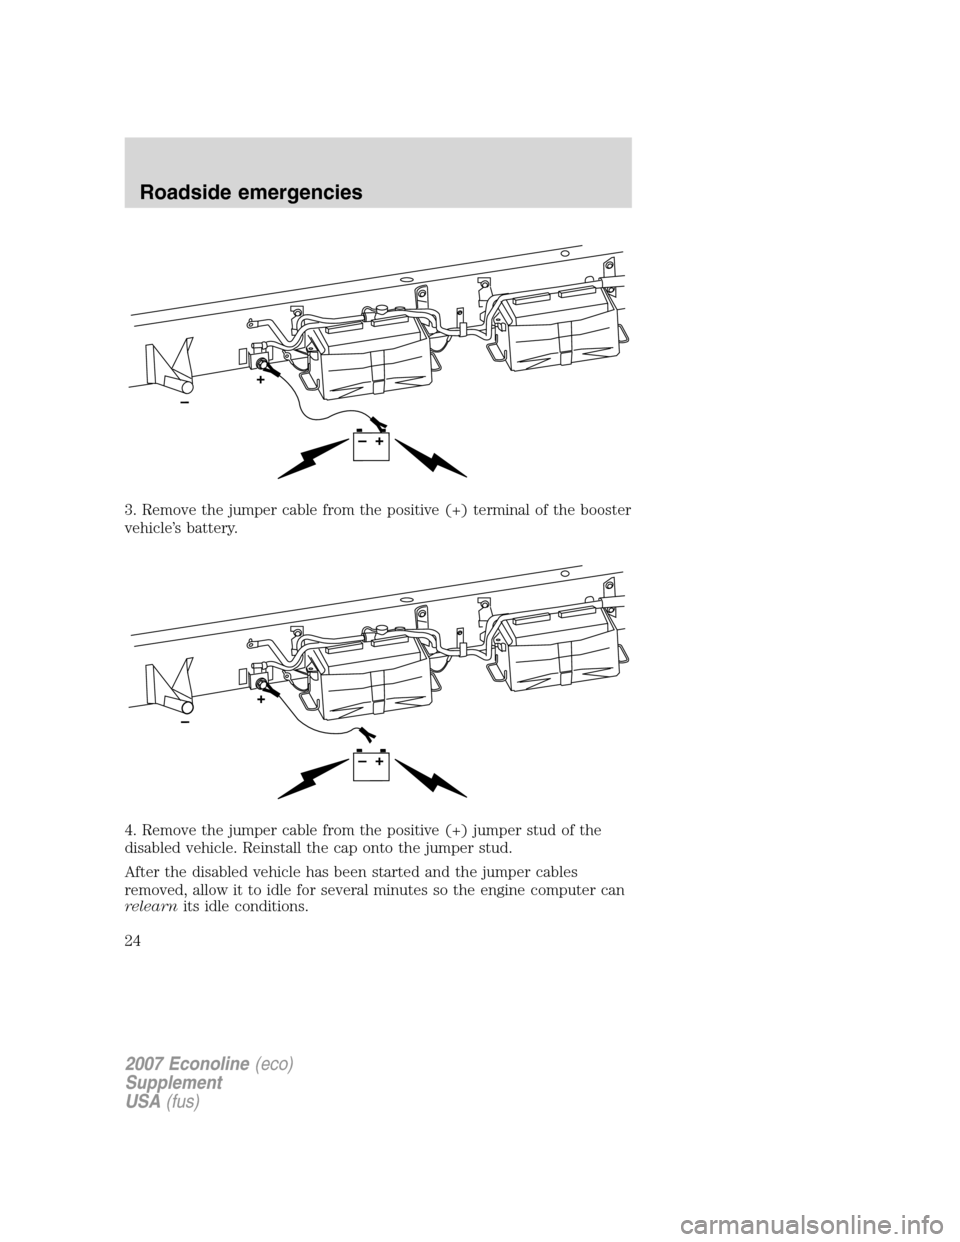 FORD SUPER DUTY 2007 1.G Diesel Supplement Manual 3. Remove the jumper cable from the positive (+) terminal of the booster
vehicle’s battery.
4. Remove the jumper cable from the positive (+) jumper stud of the
disabled vehicle. Reinstall the cap on